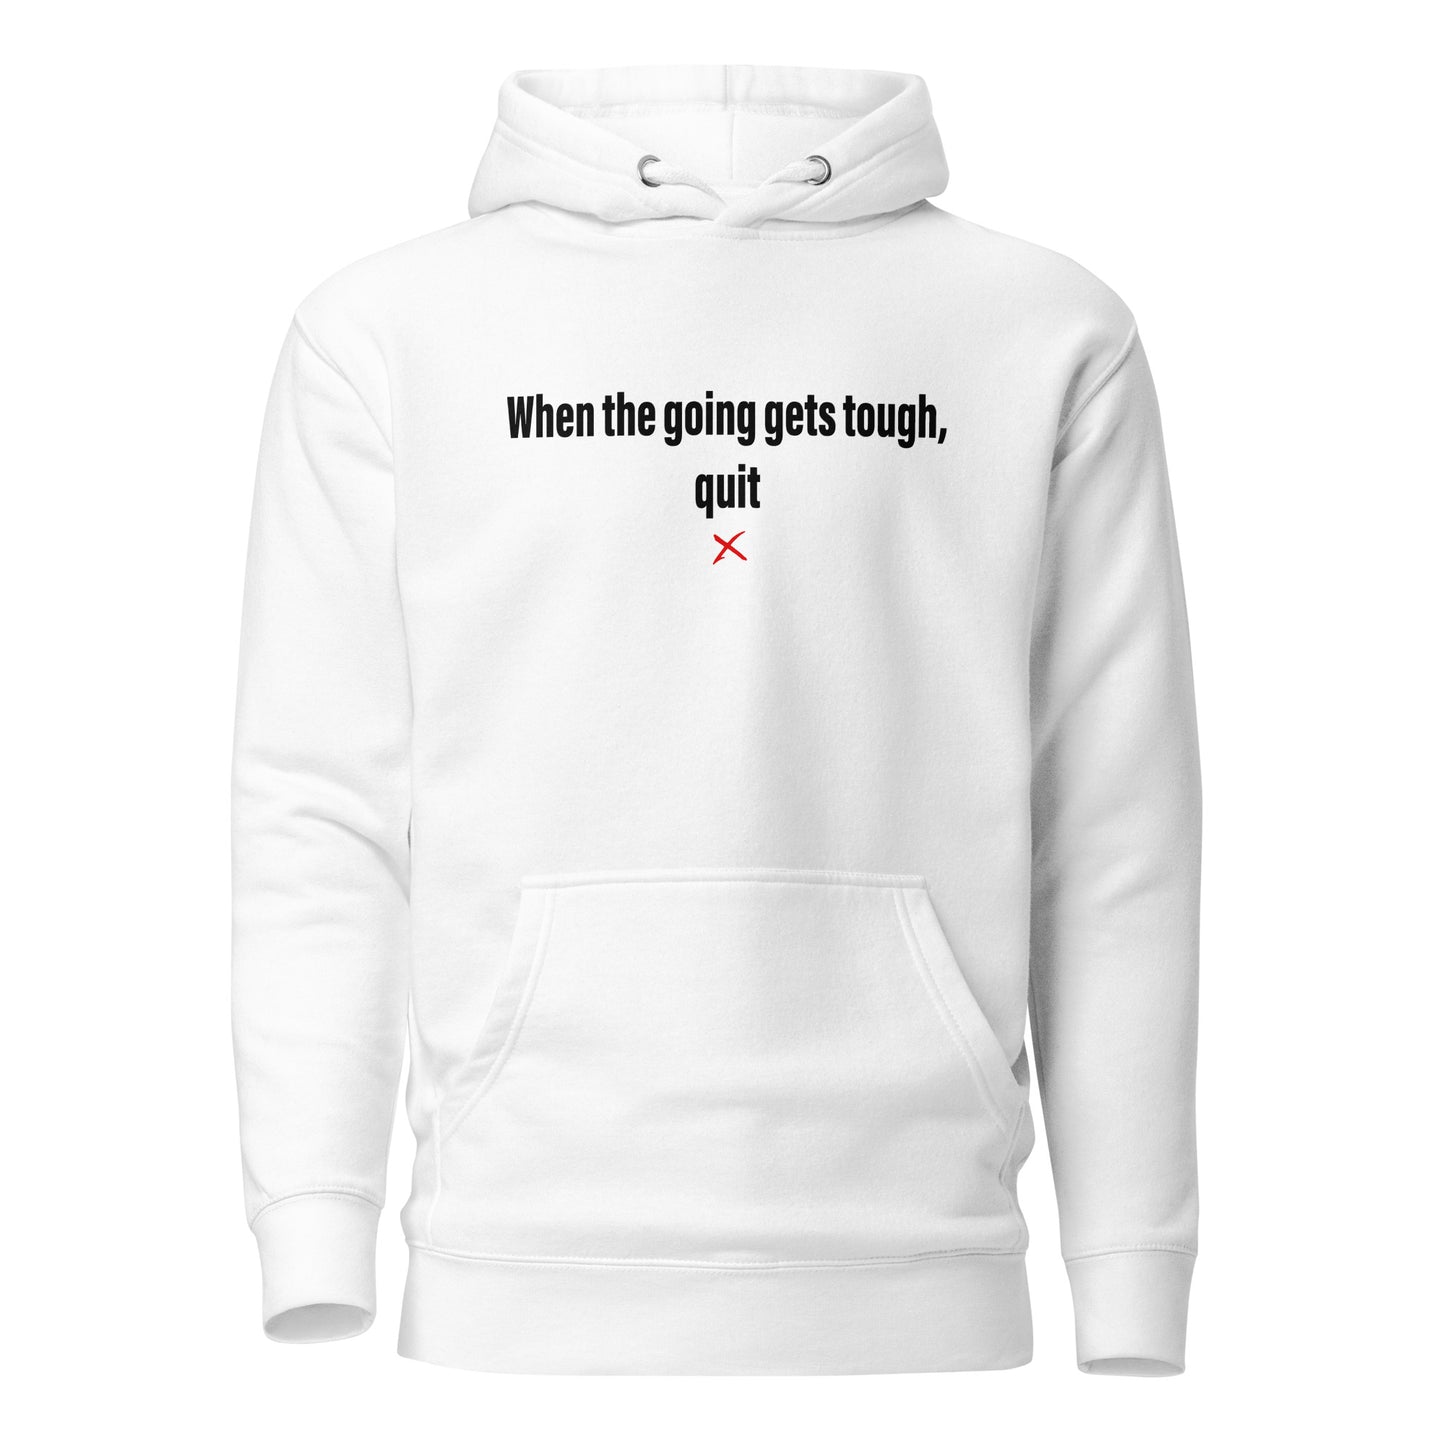 When the going gets tough, quit - Hoodie